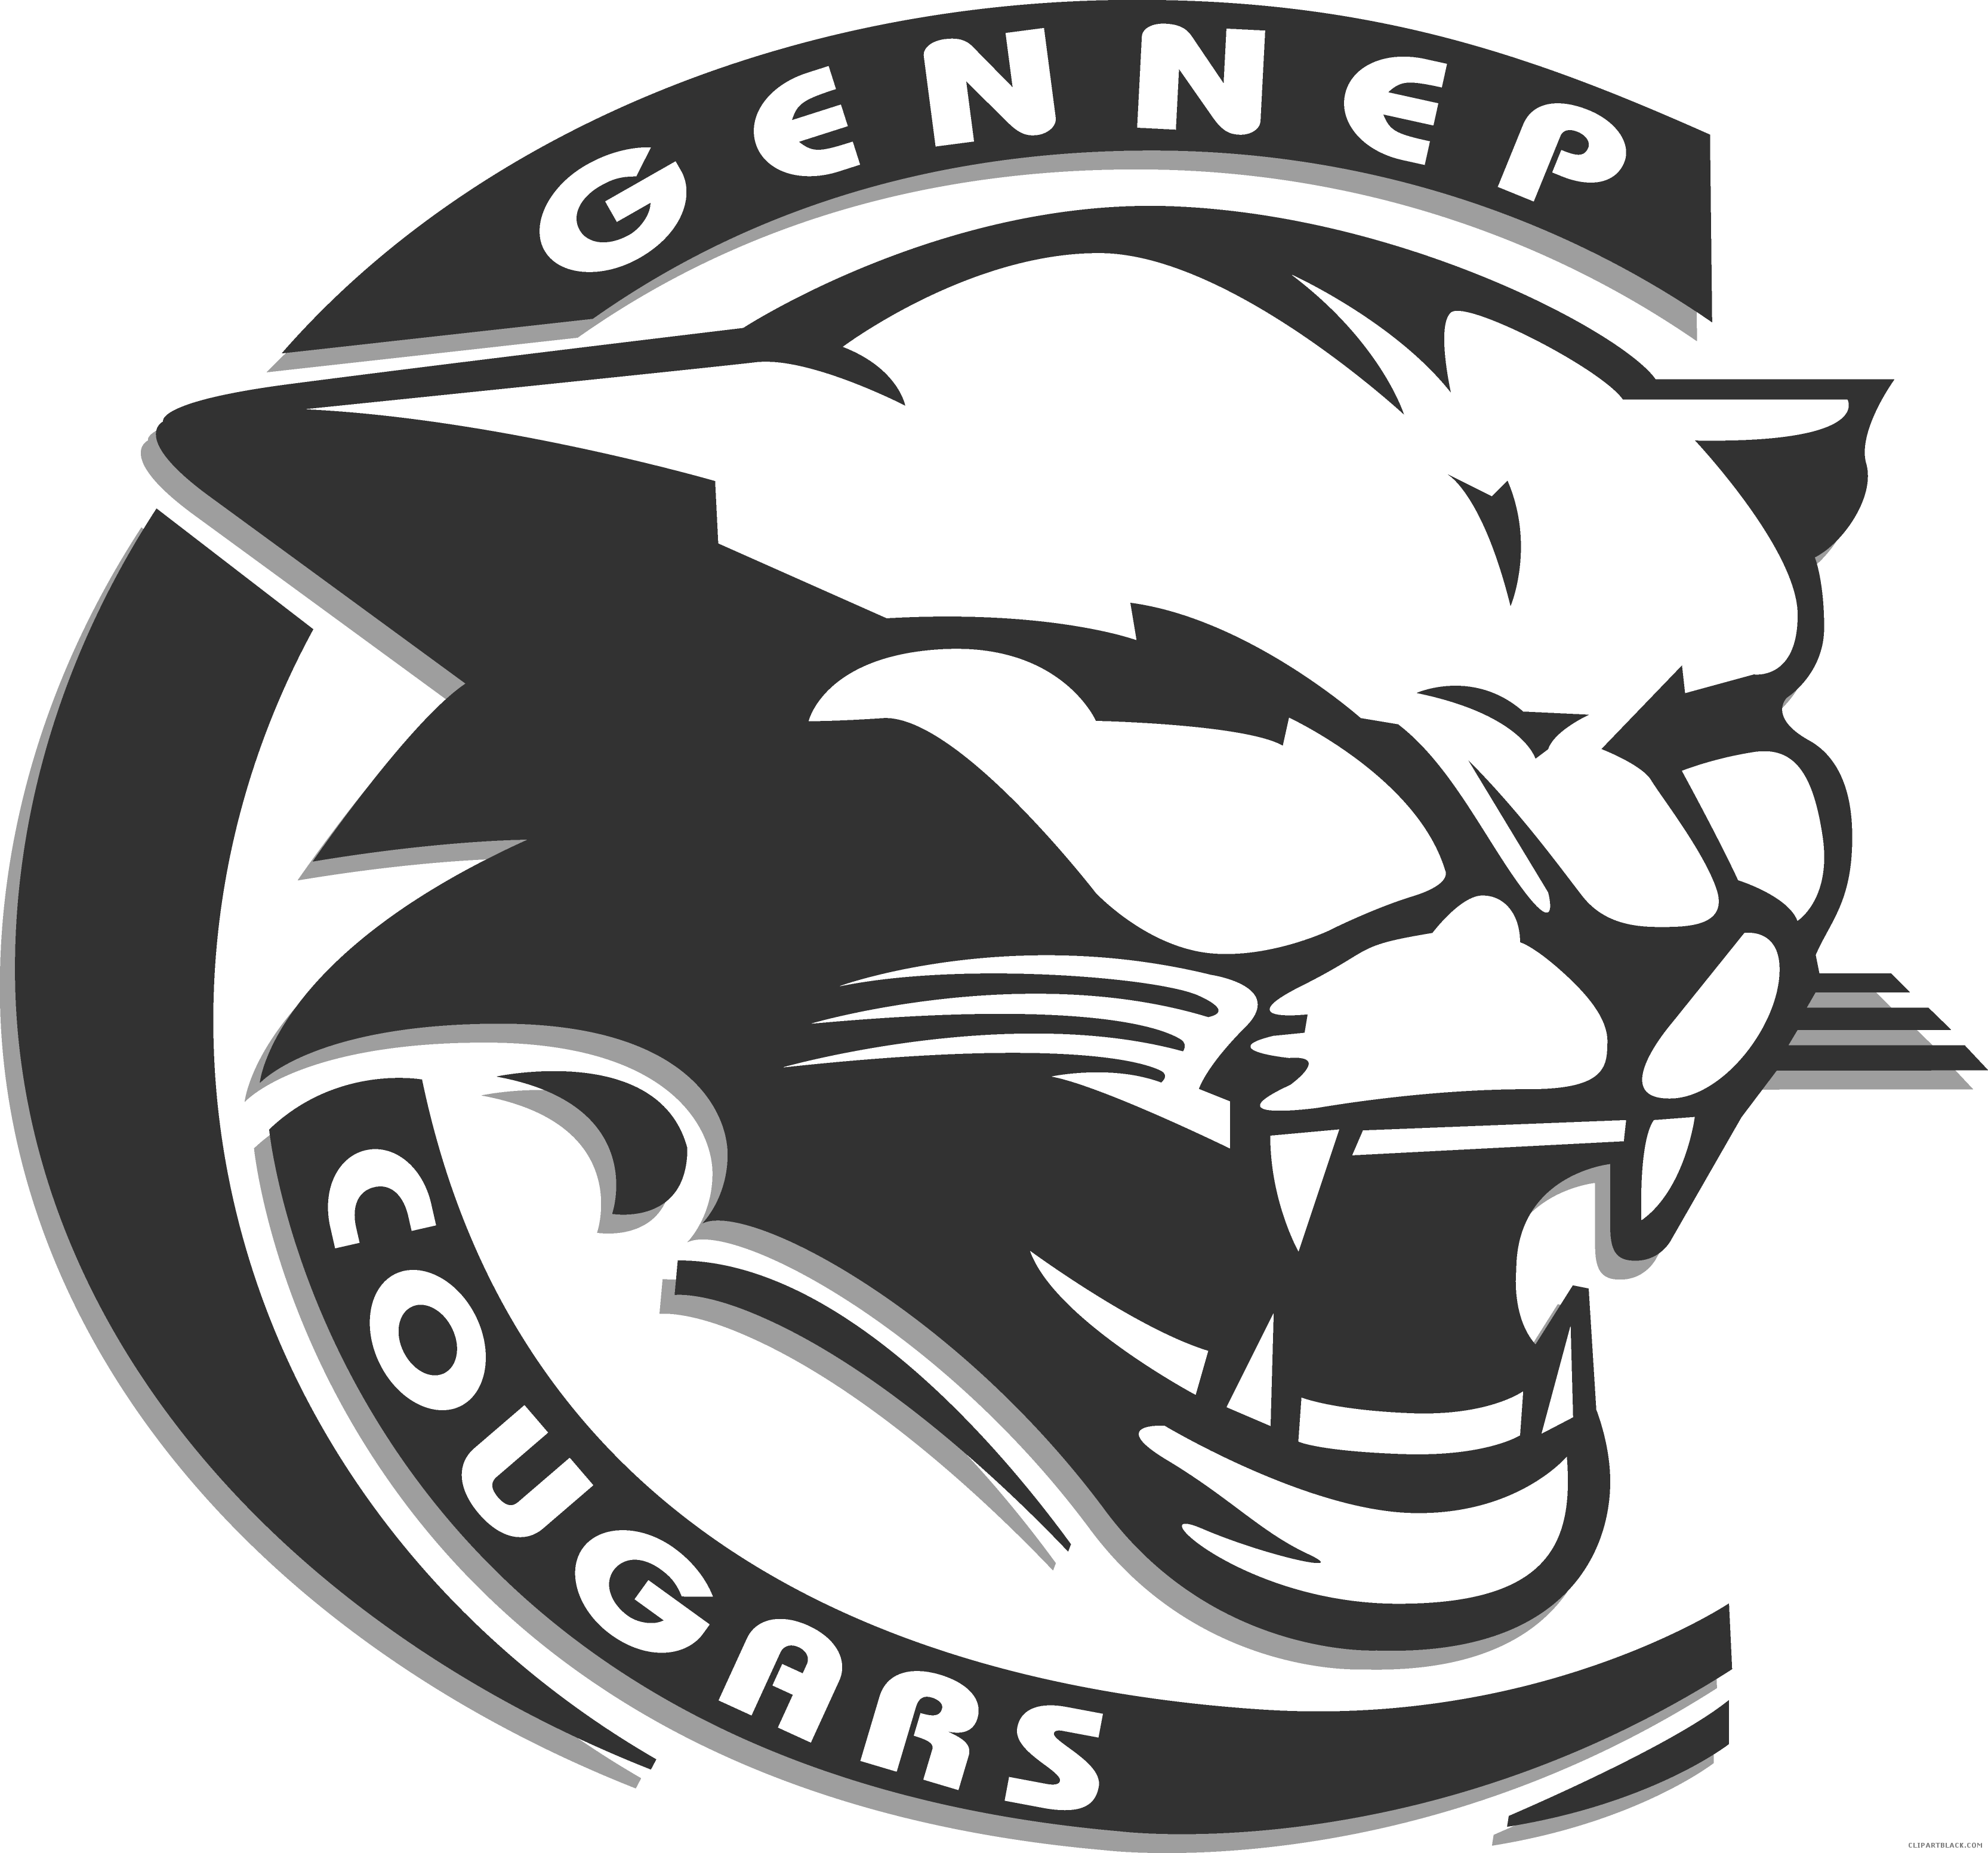 cougar clipart black and white